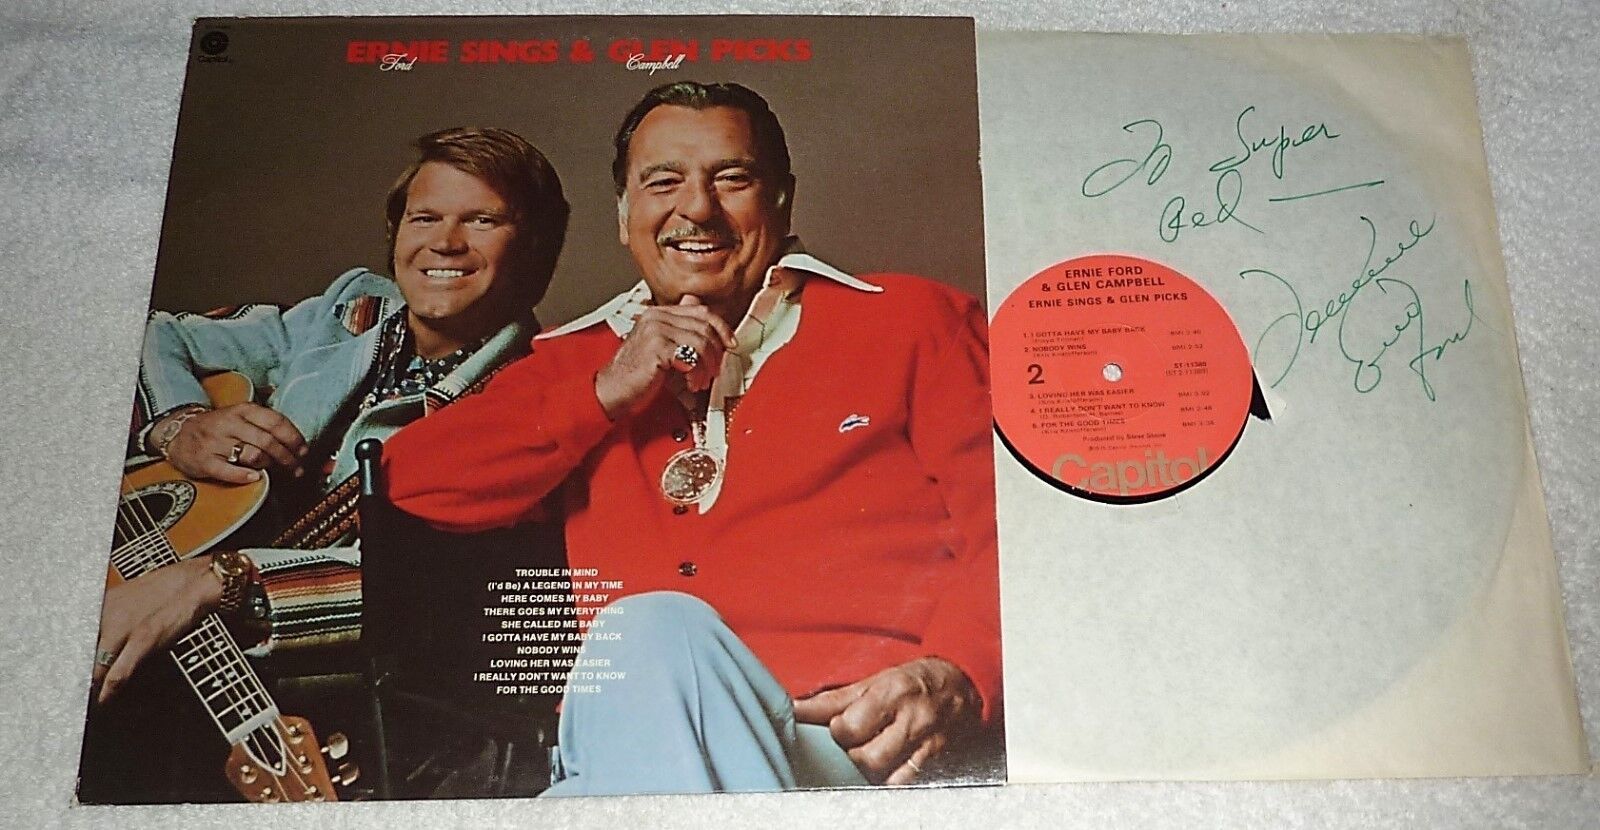 VINYL LP by TENNESSEE ERNIE FORD & GLEN CAMPBELL (1975) SIGNED by T. ERNIE FORD